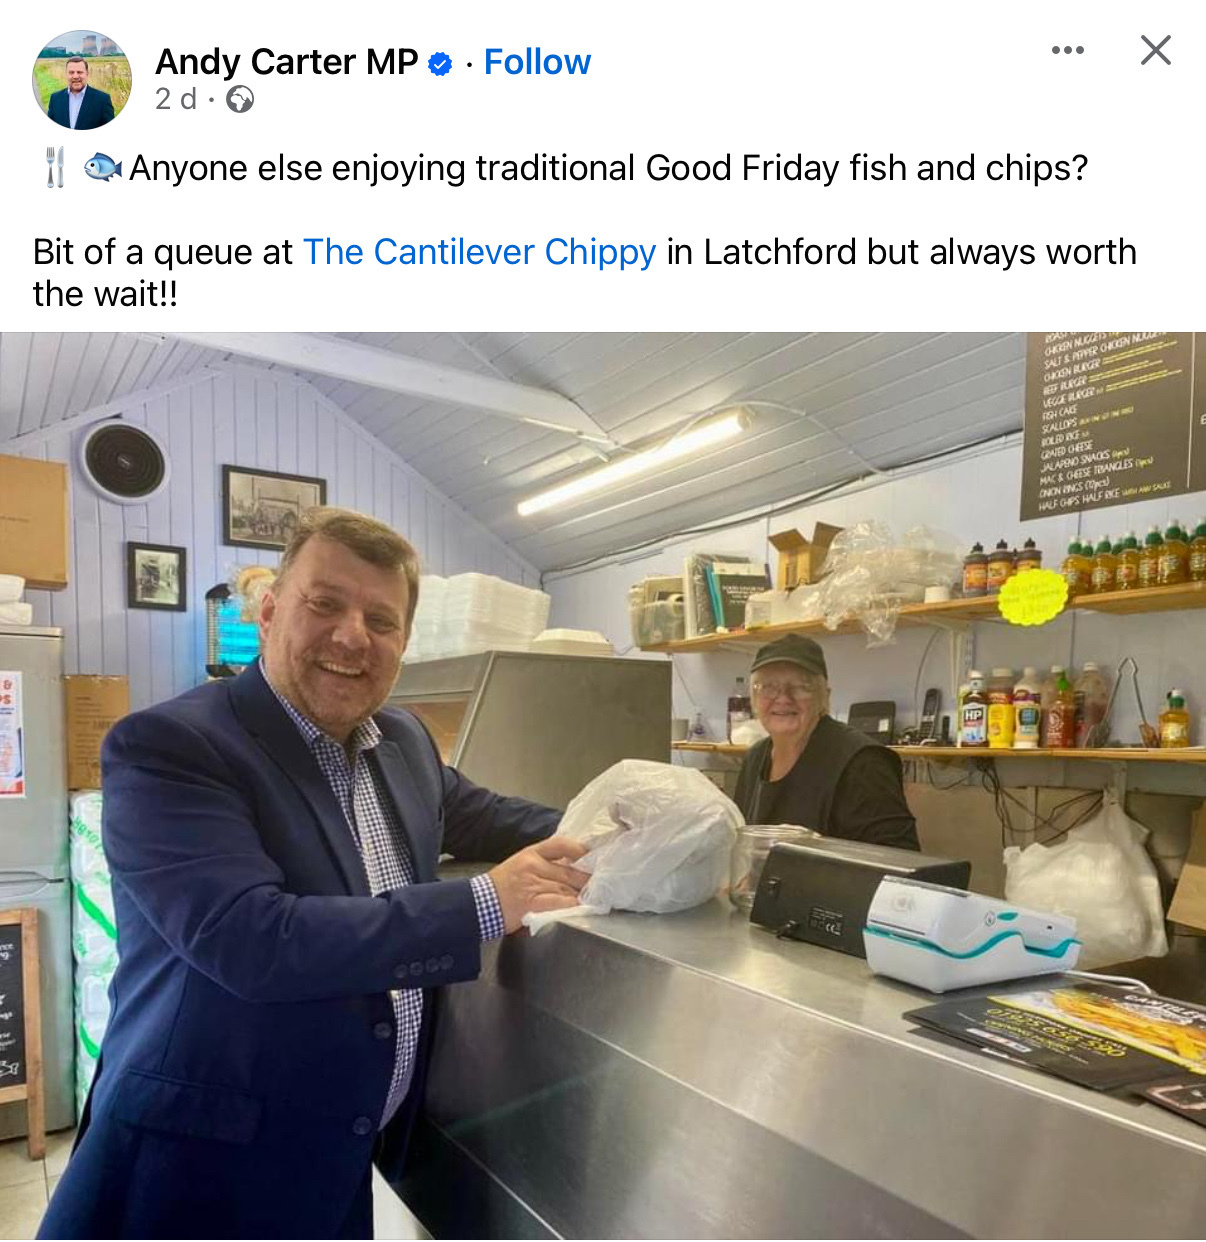 Andy Carter MP instagram post: Anyone else enjoying traditional Good Friday fish and chips?&10;Bit of a queue at The Cantilever Chippy in Latchford but always worth the wait!!